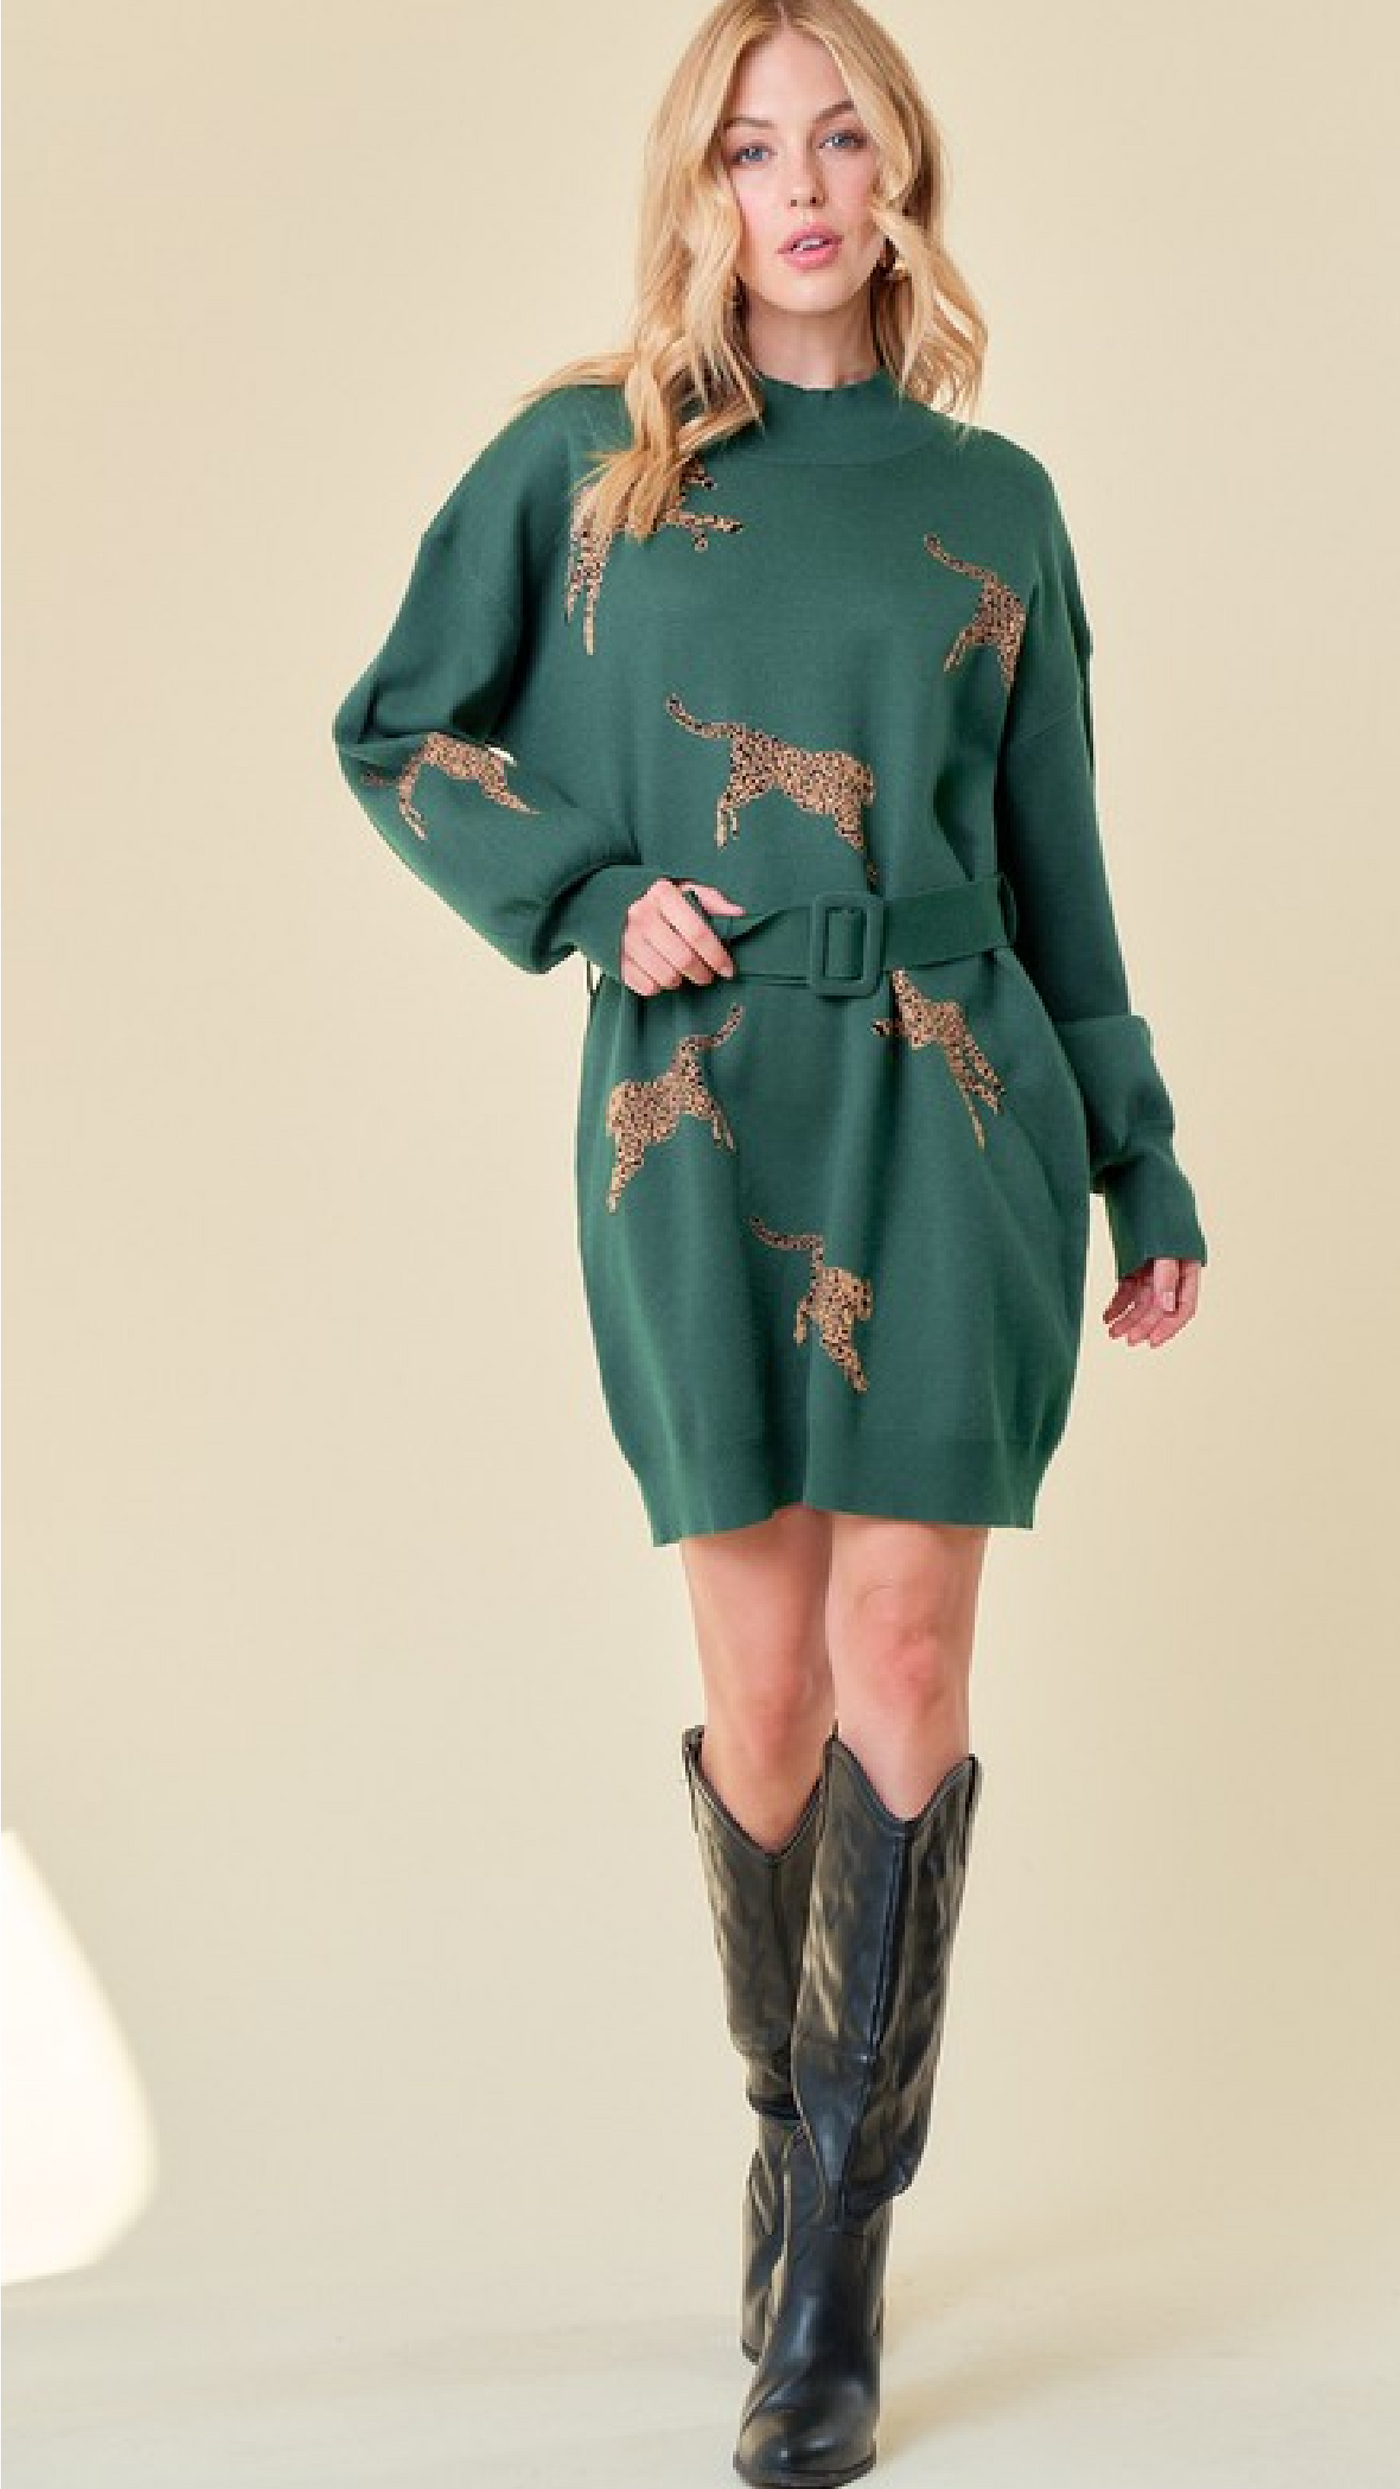 Cheetah Sweater Dress - Piper and Hollow Boutique